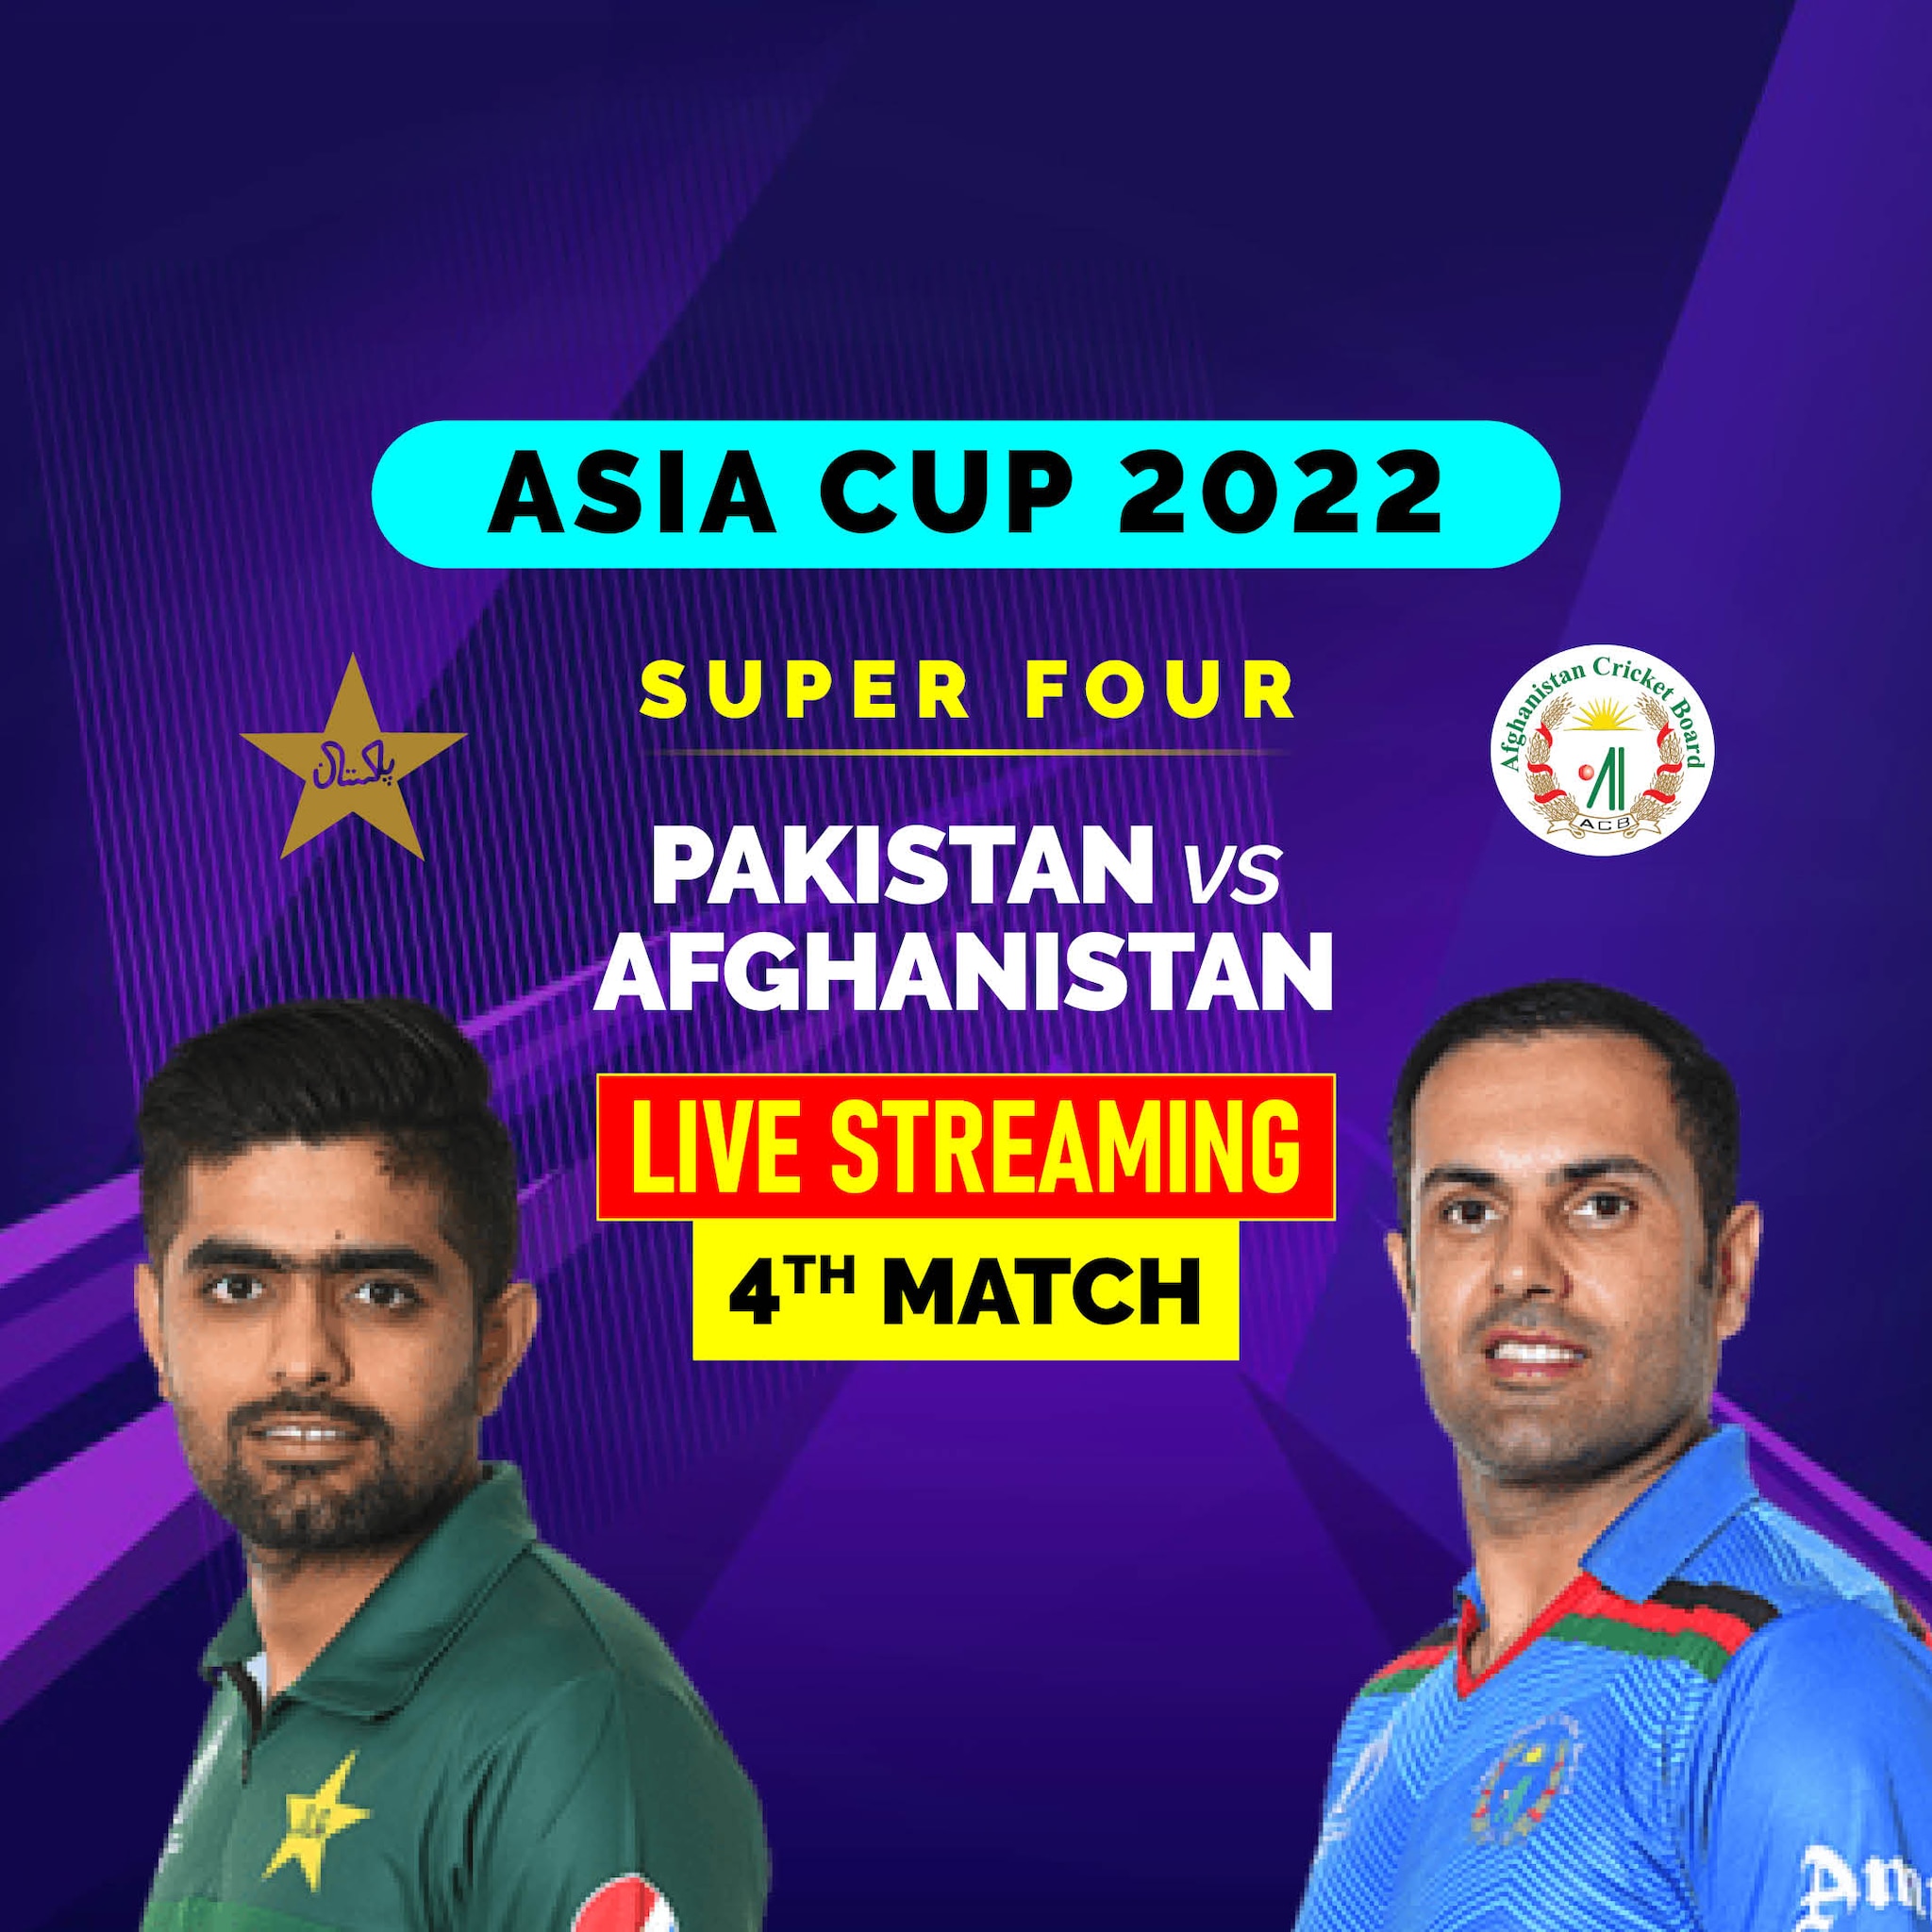 Pakistan vs Afghanistan Live Cricket Streaming-How to Watch Asia Cup 2022, PAK vs AFG Super Fours Coverage on TV And Online